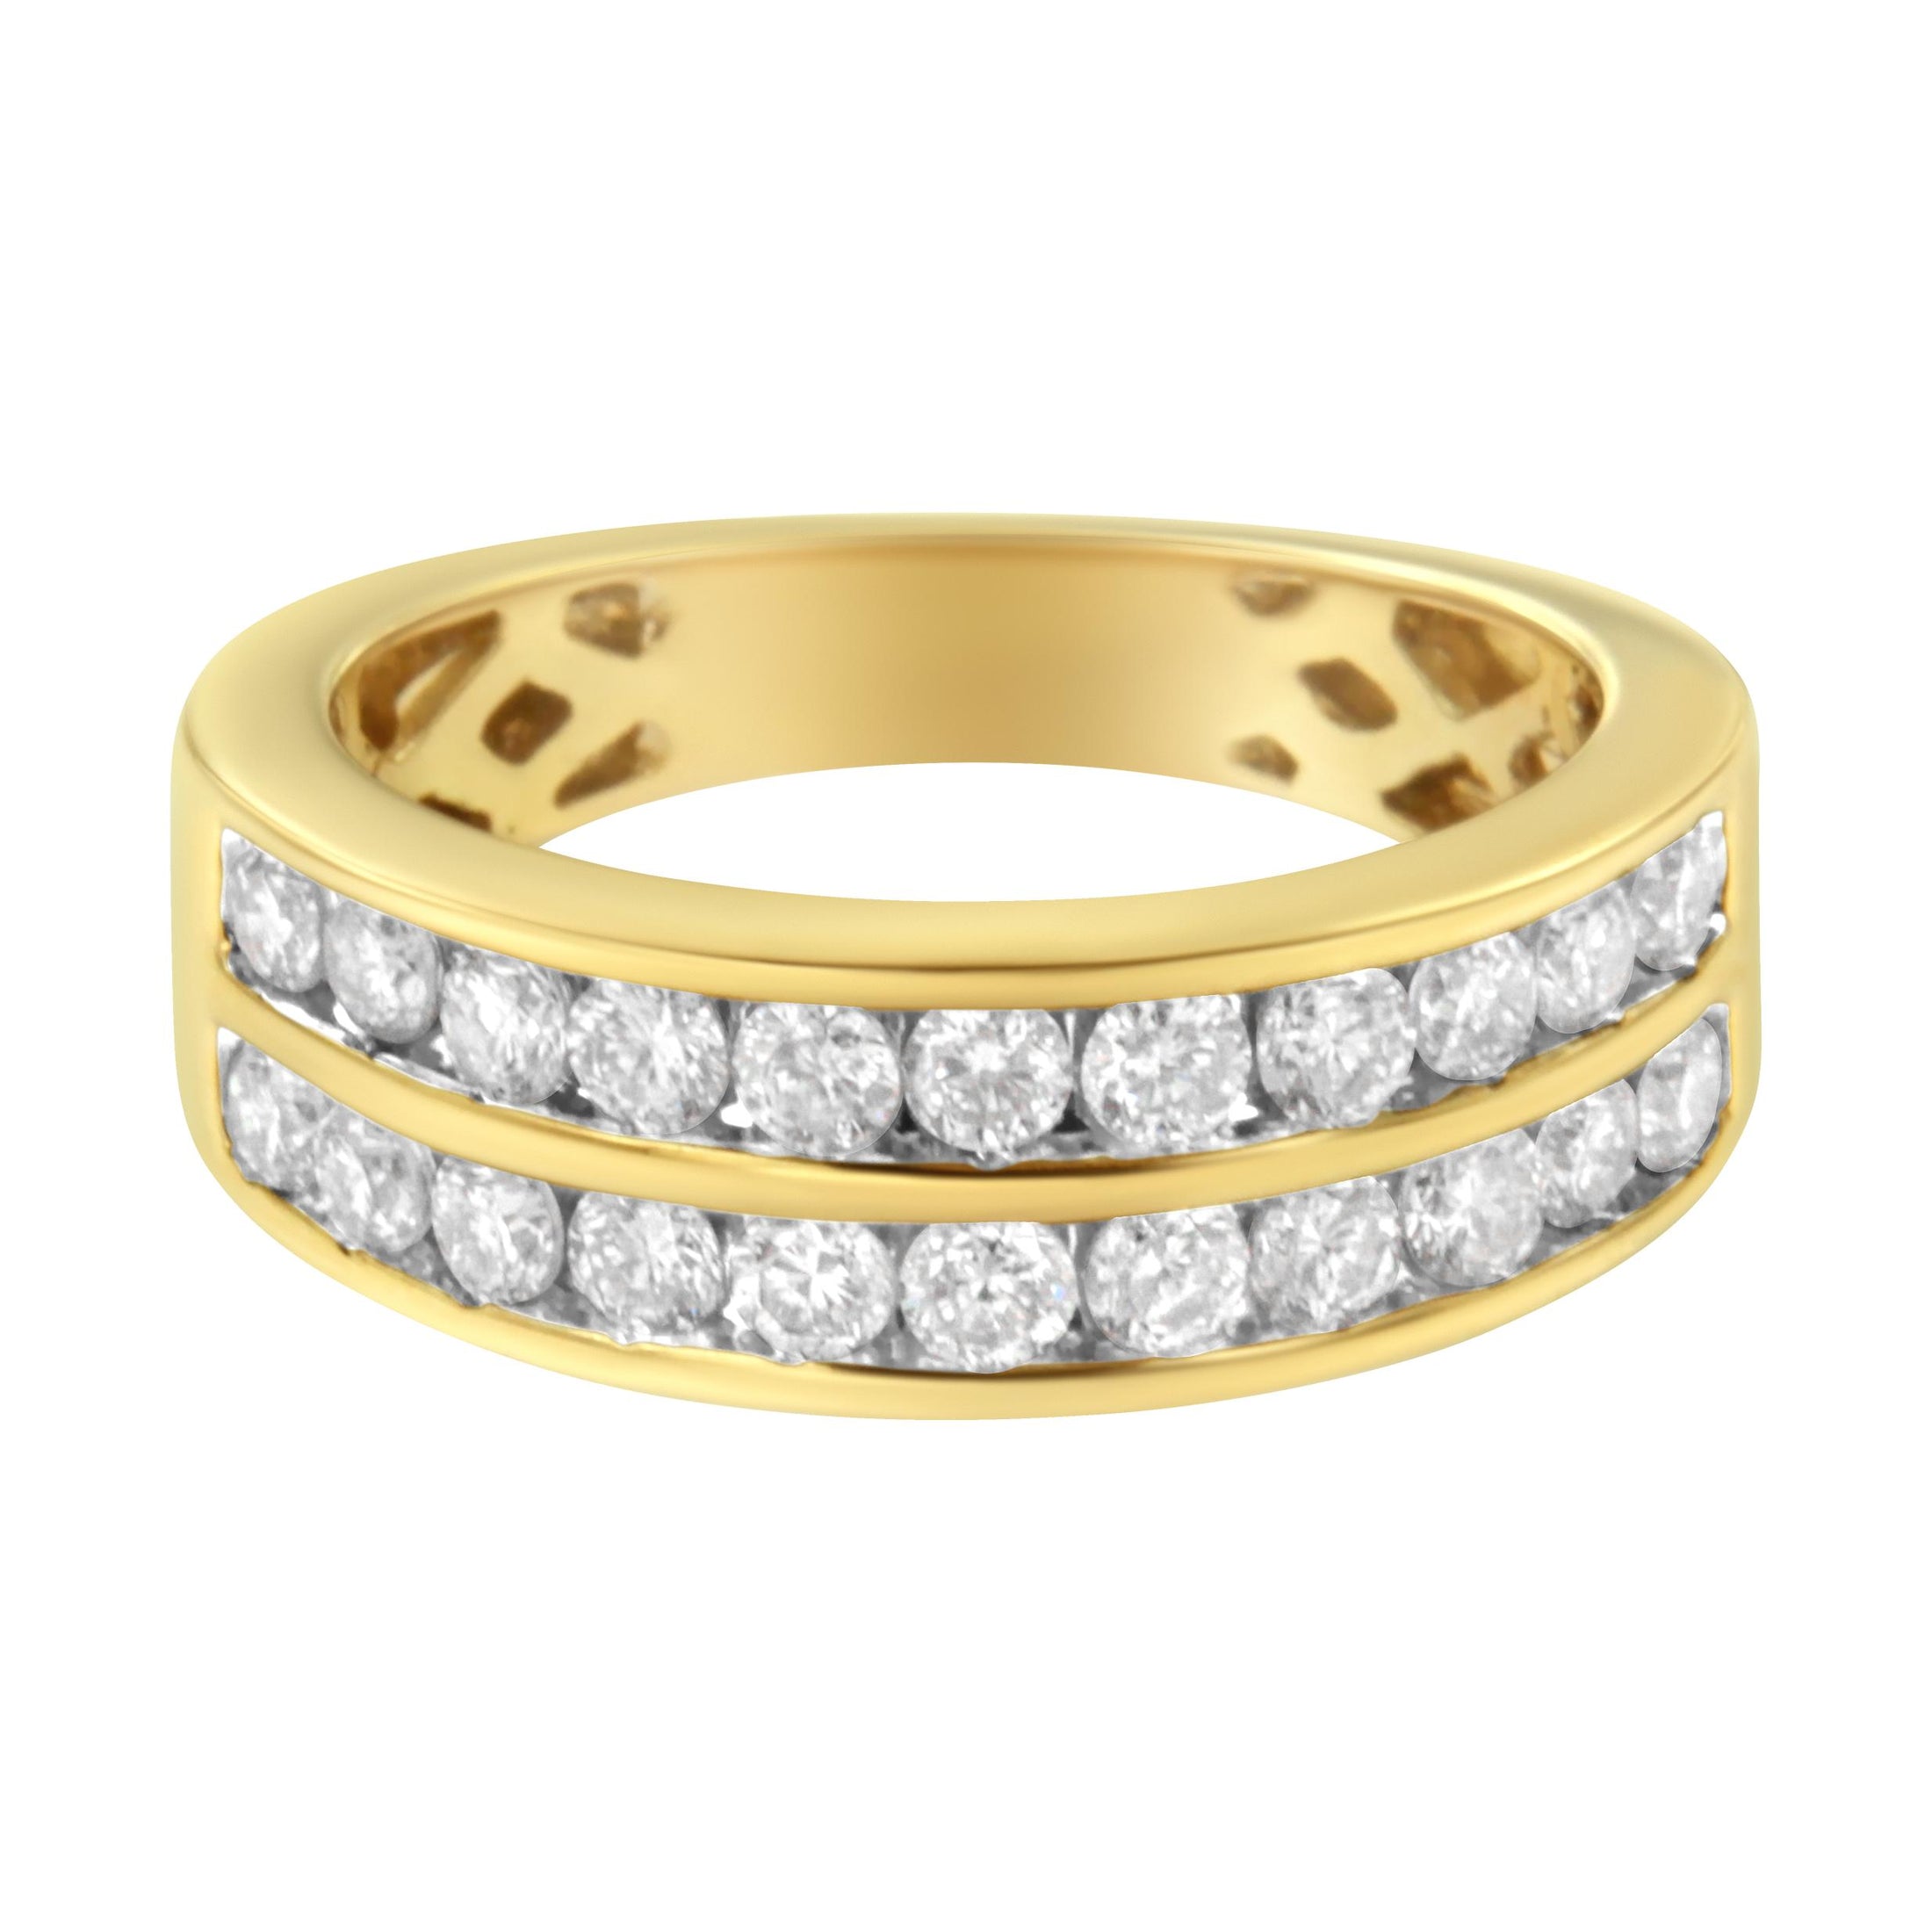 10K Yellow Gold Two-Row Diamond Band Ring - Size 6